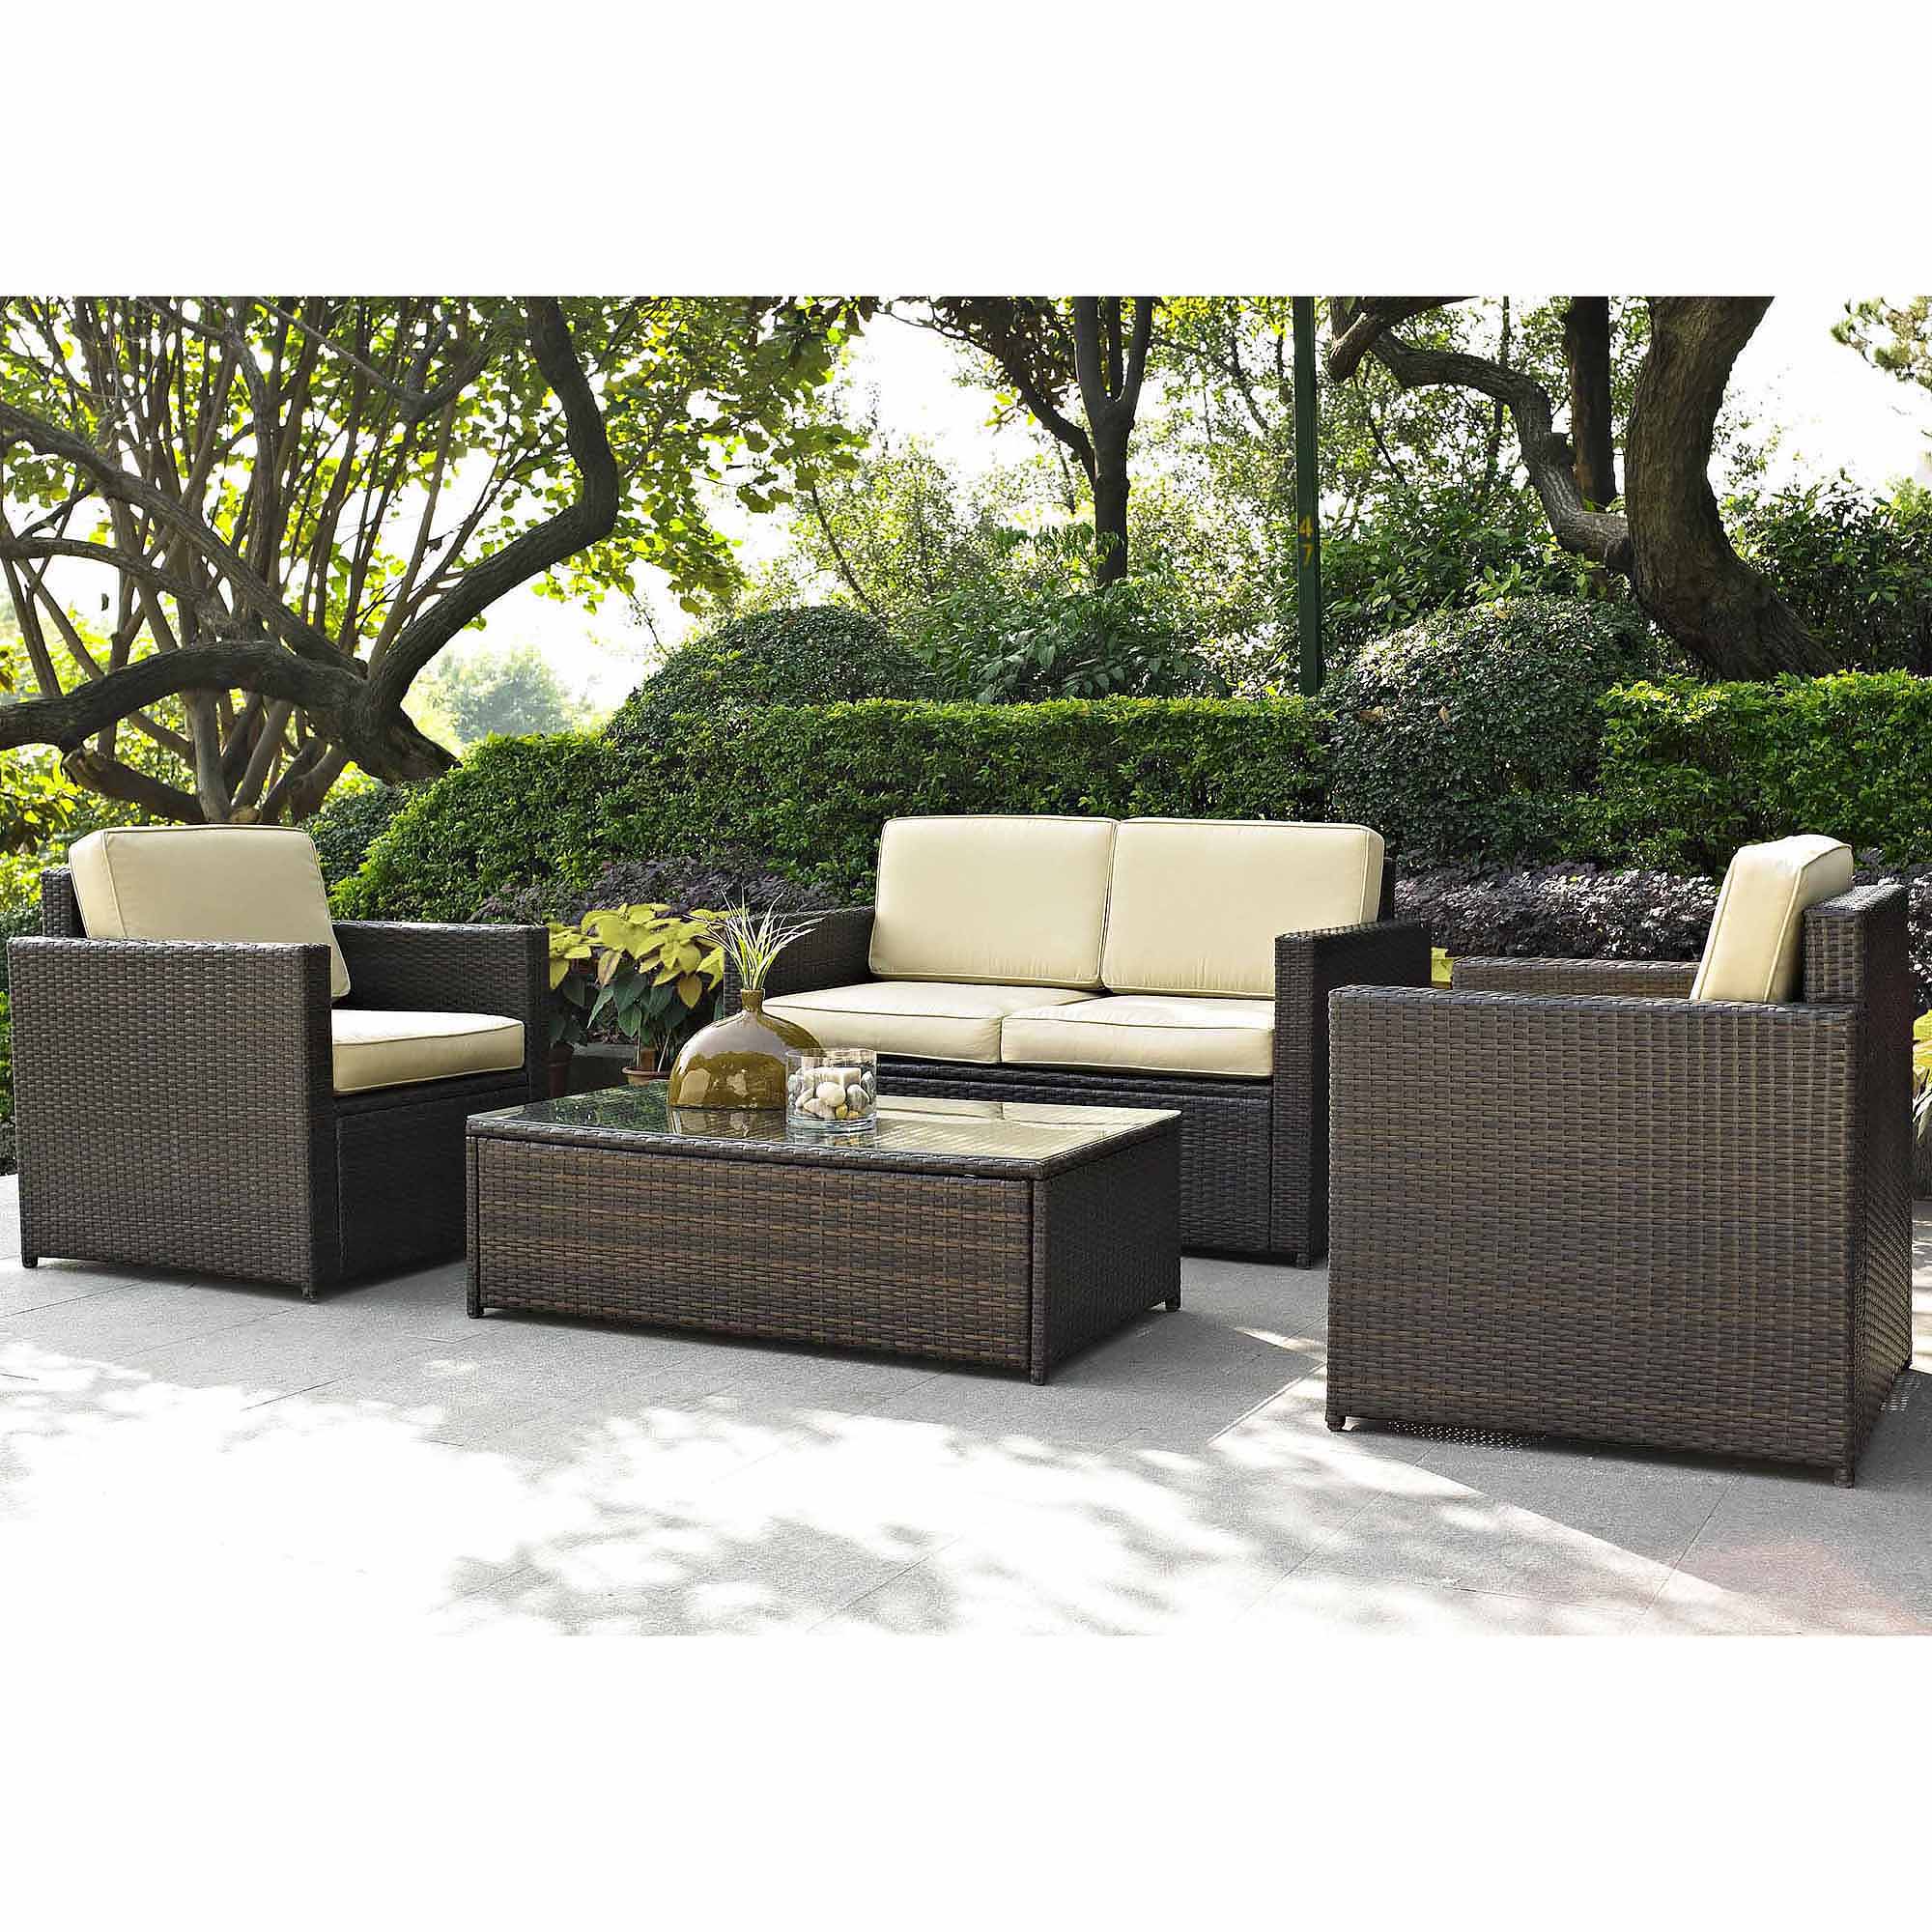 Best Choice Products 4-Piece Wicker Patio Furniture Set w/ Tempered Glass,  3 Sofas, Table, Cushioned Seats - Black - Traveller Location